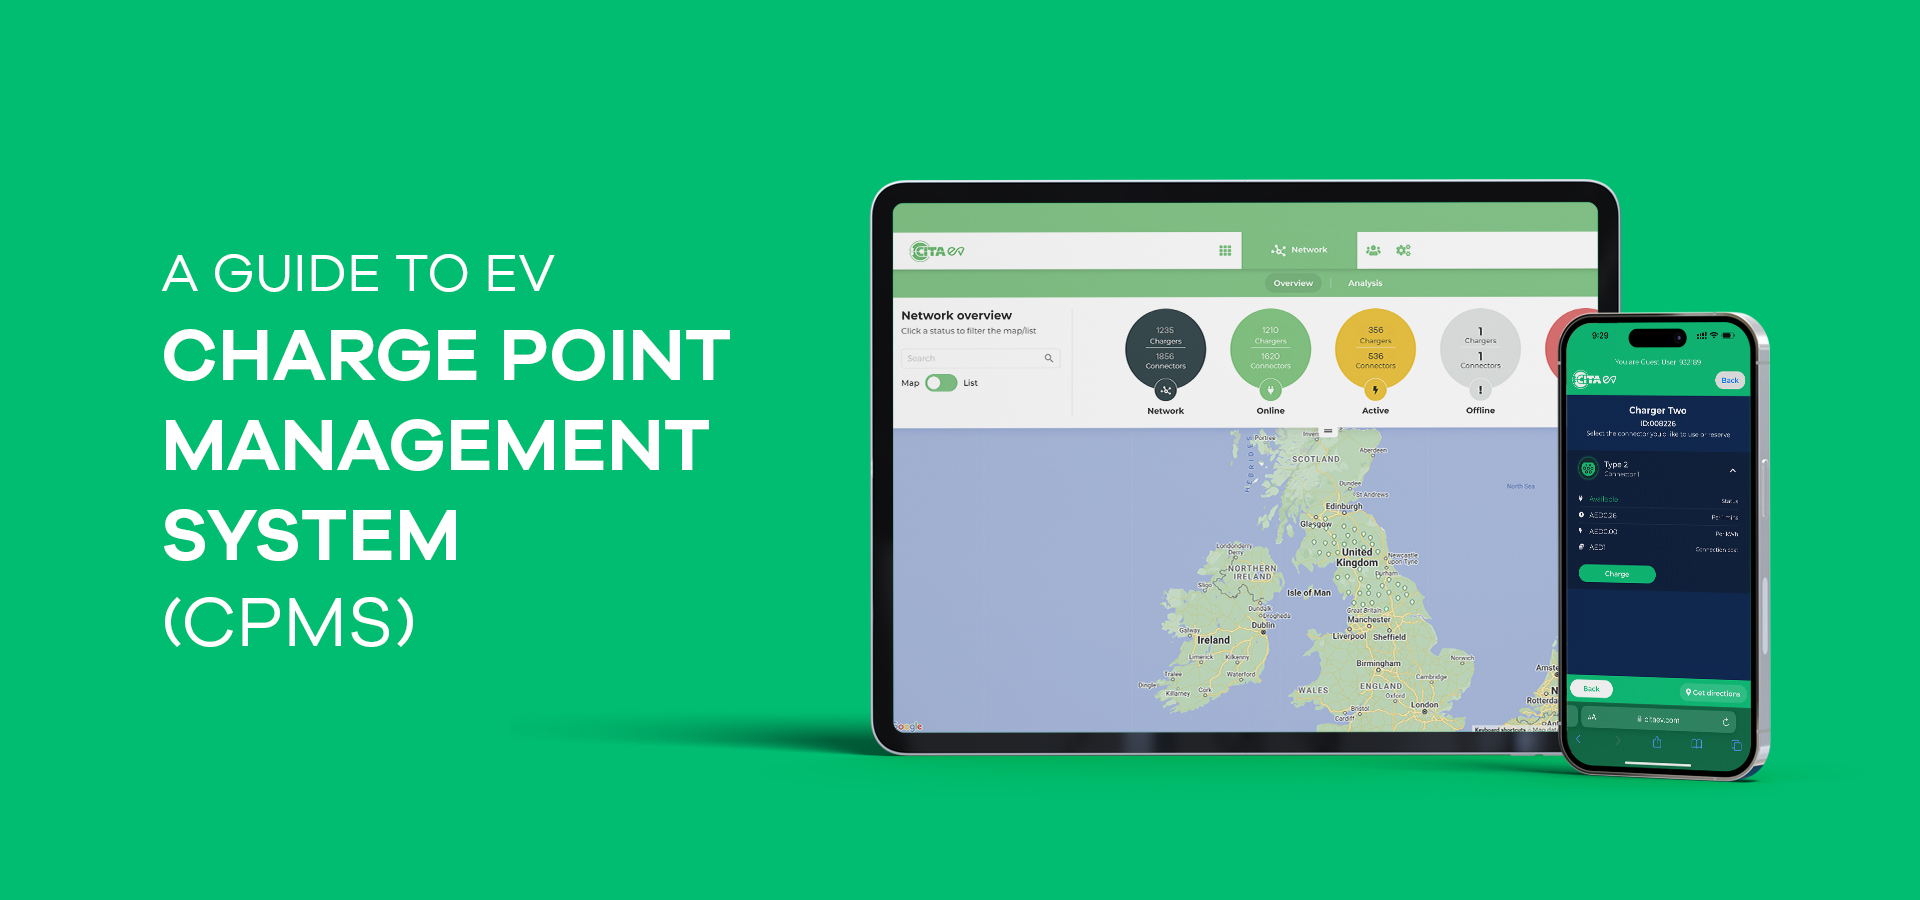 A Guide to EV Charge Point Management System (CPMS)